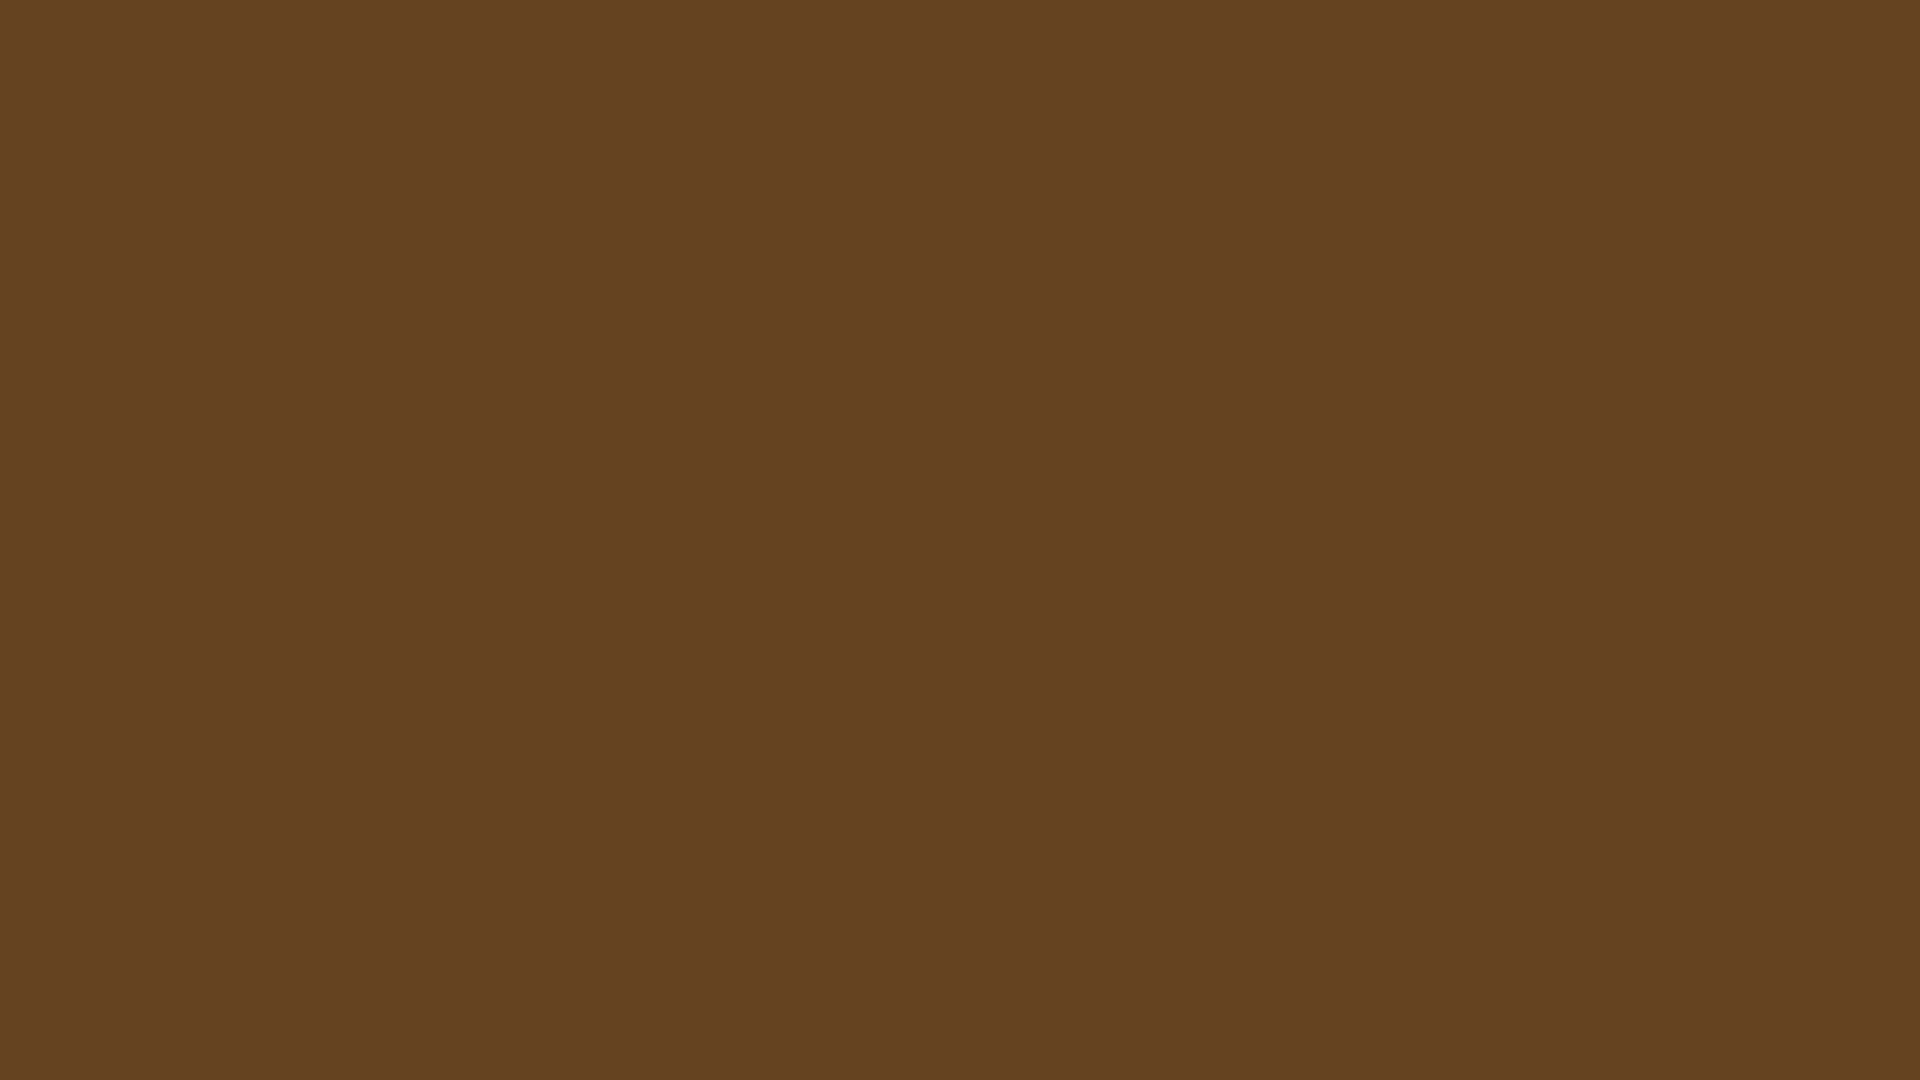 Free 1920x1080 resolution Dark Brown solid color background view and